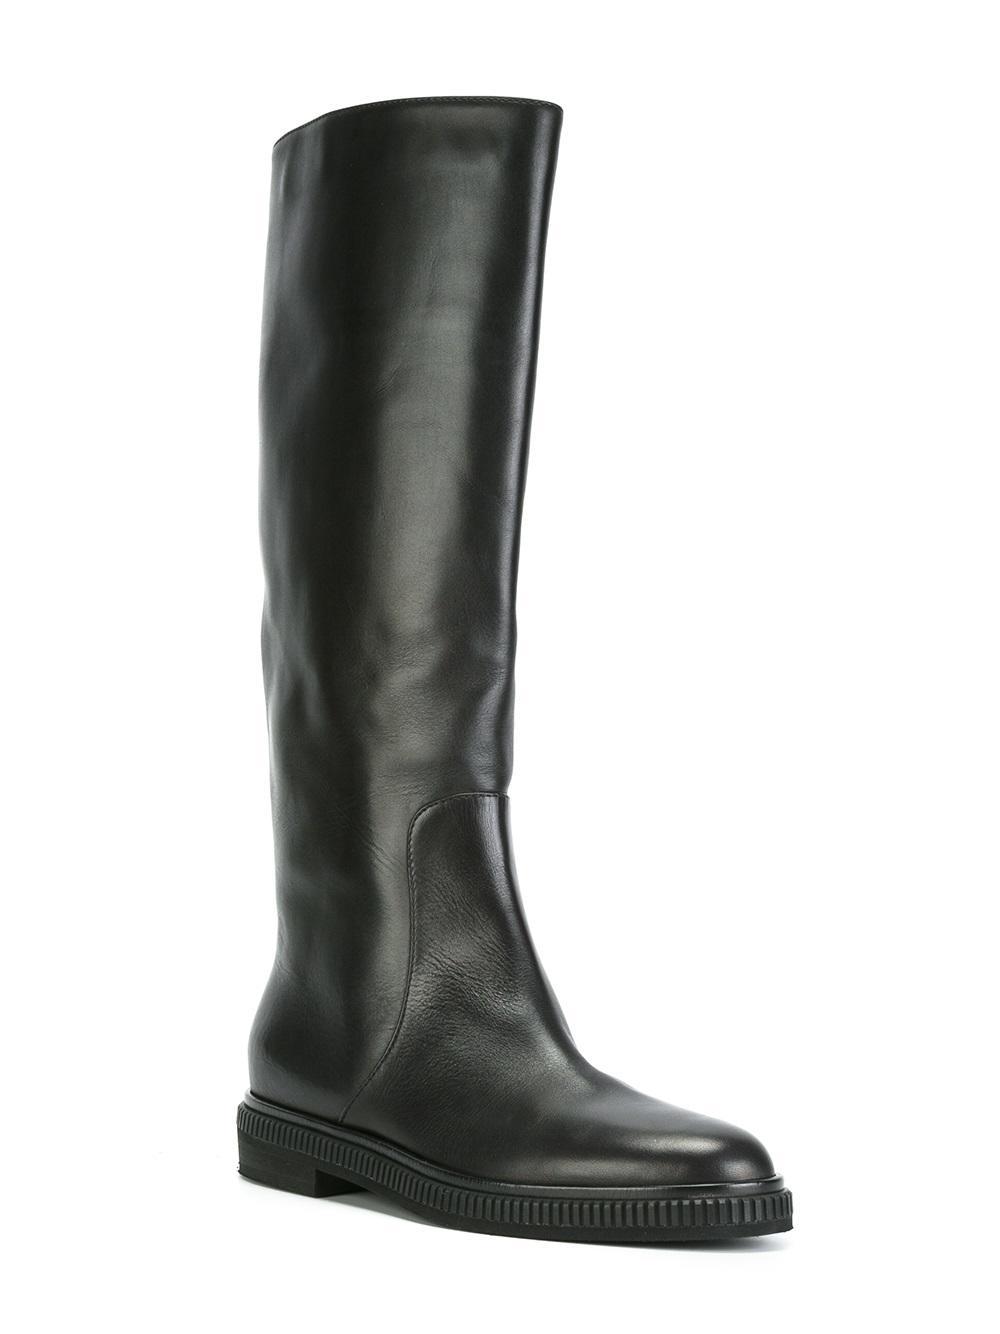 Sergio rossi - Knee Length Flat Boots - Women - Leather - 39.5 in Black ...